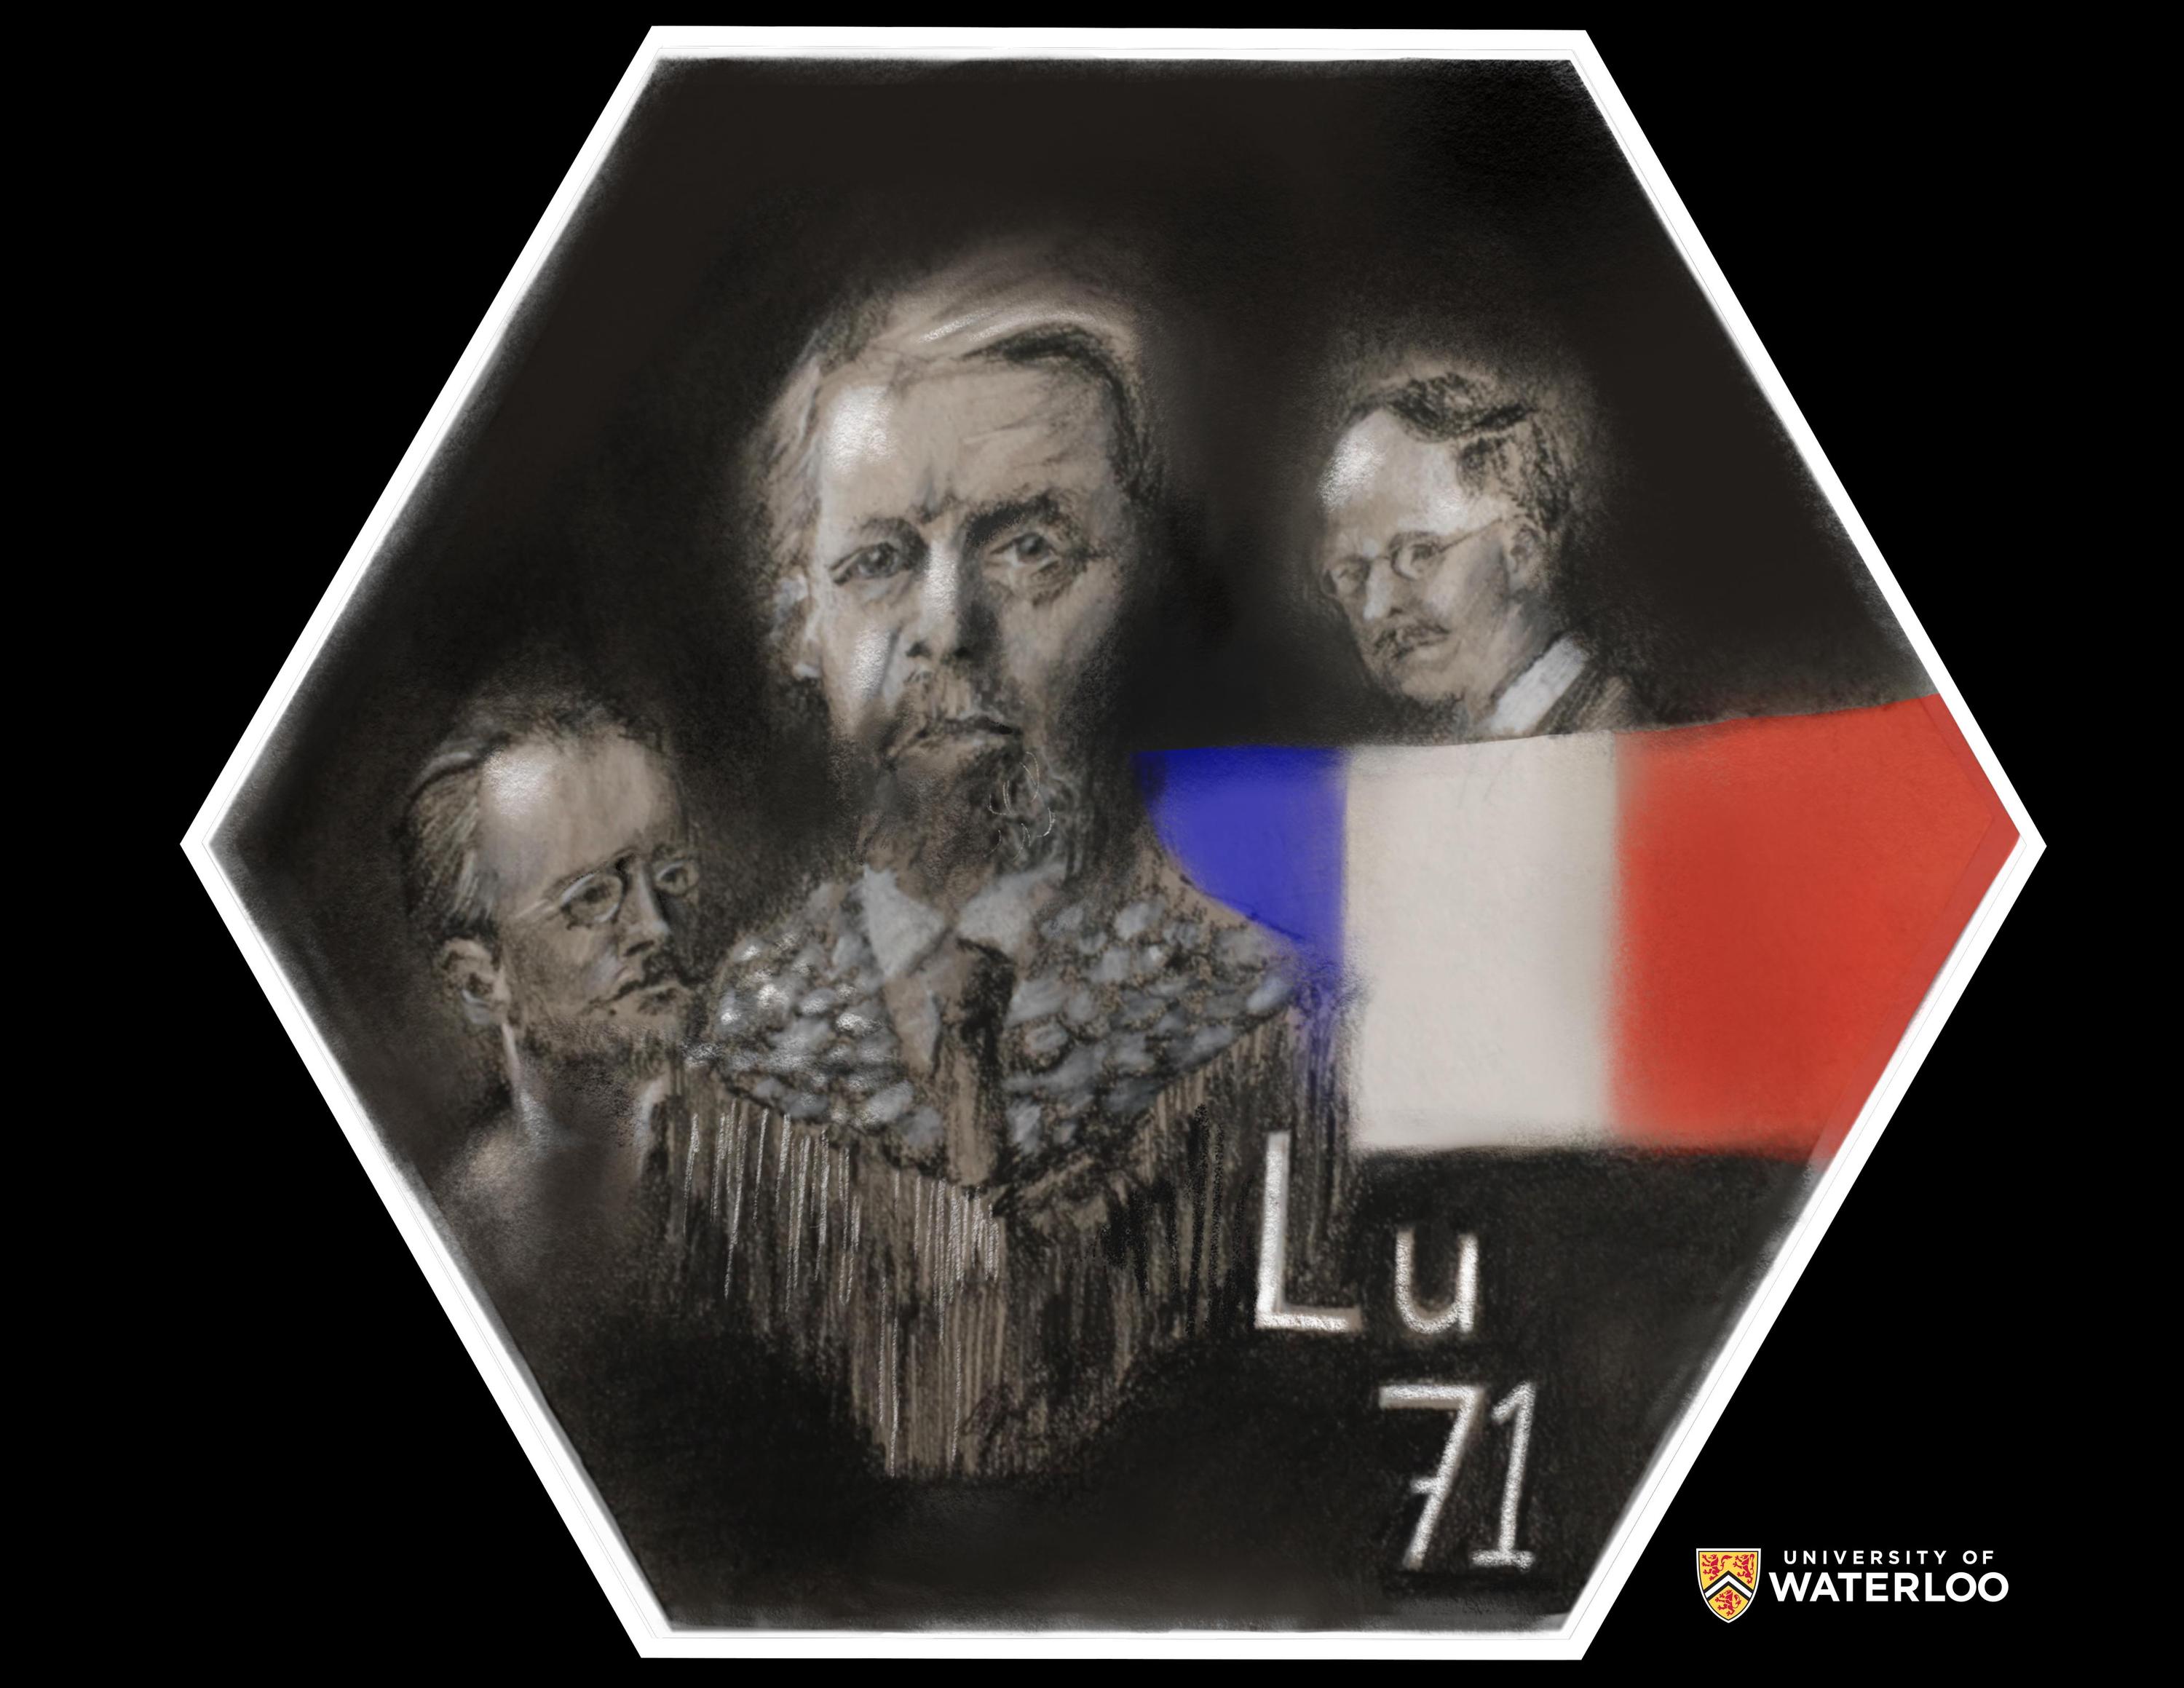 Charcoal on black paper. Portraits of Georges Urbain (centre foreground), and Karl Auer and Charles James (both in the background). To the right a French flag. In the lower right corner, the chemical symbol “Lu” and atomic number “71”.